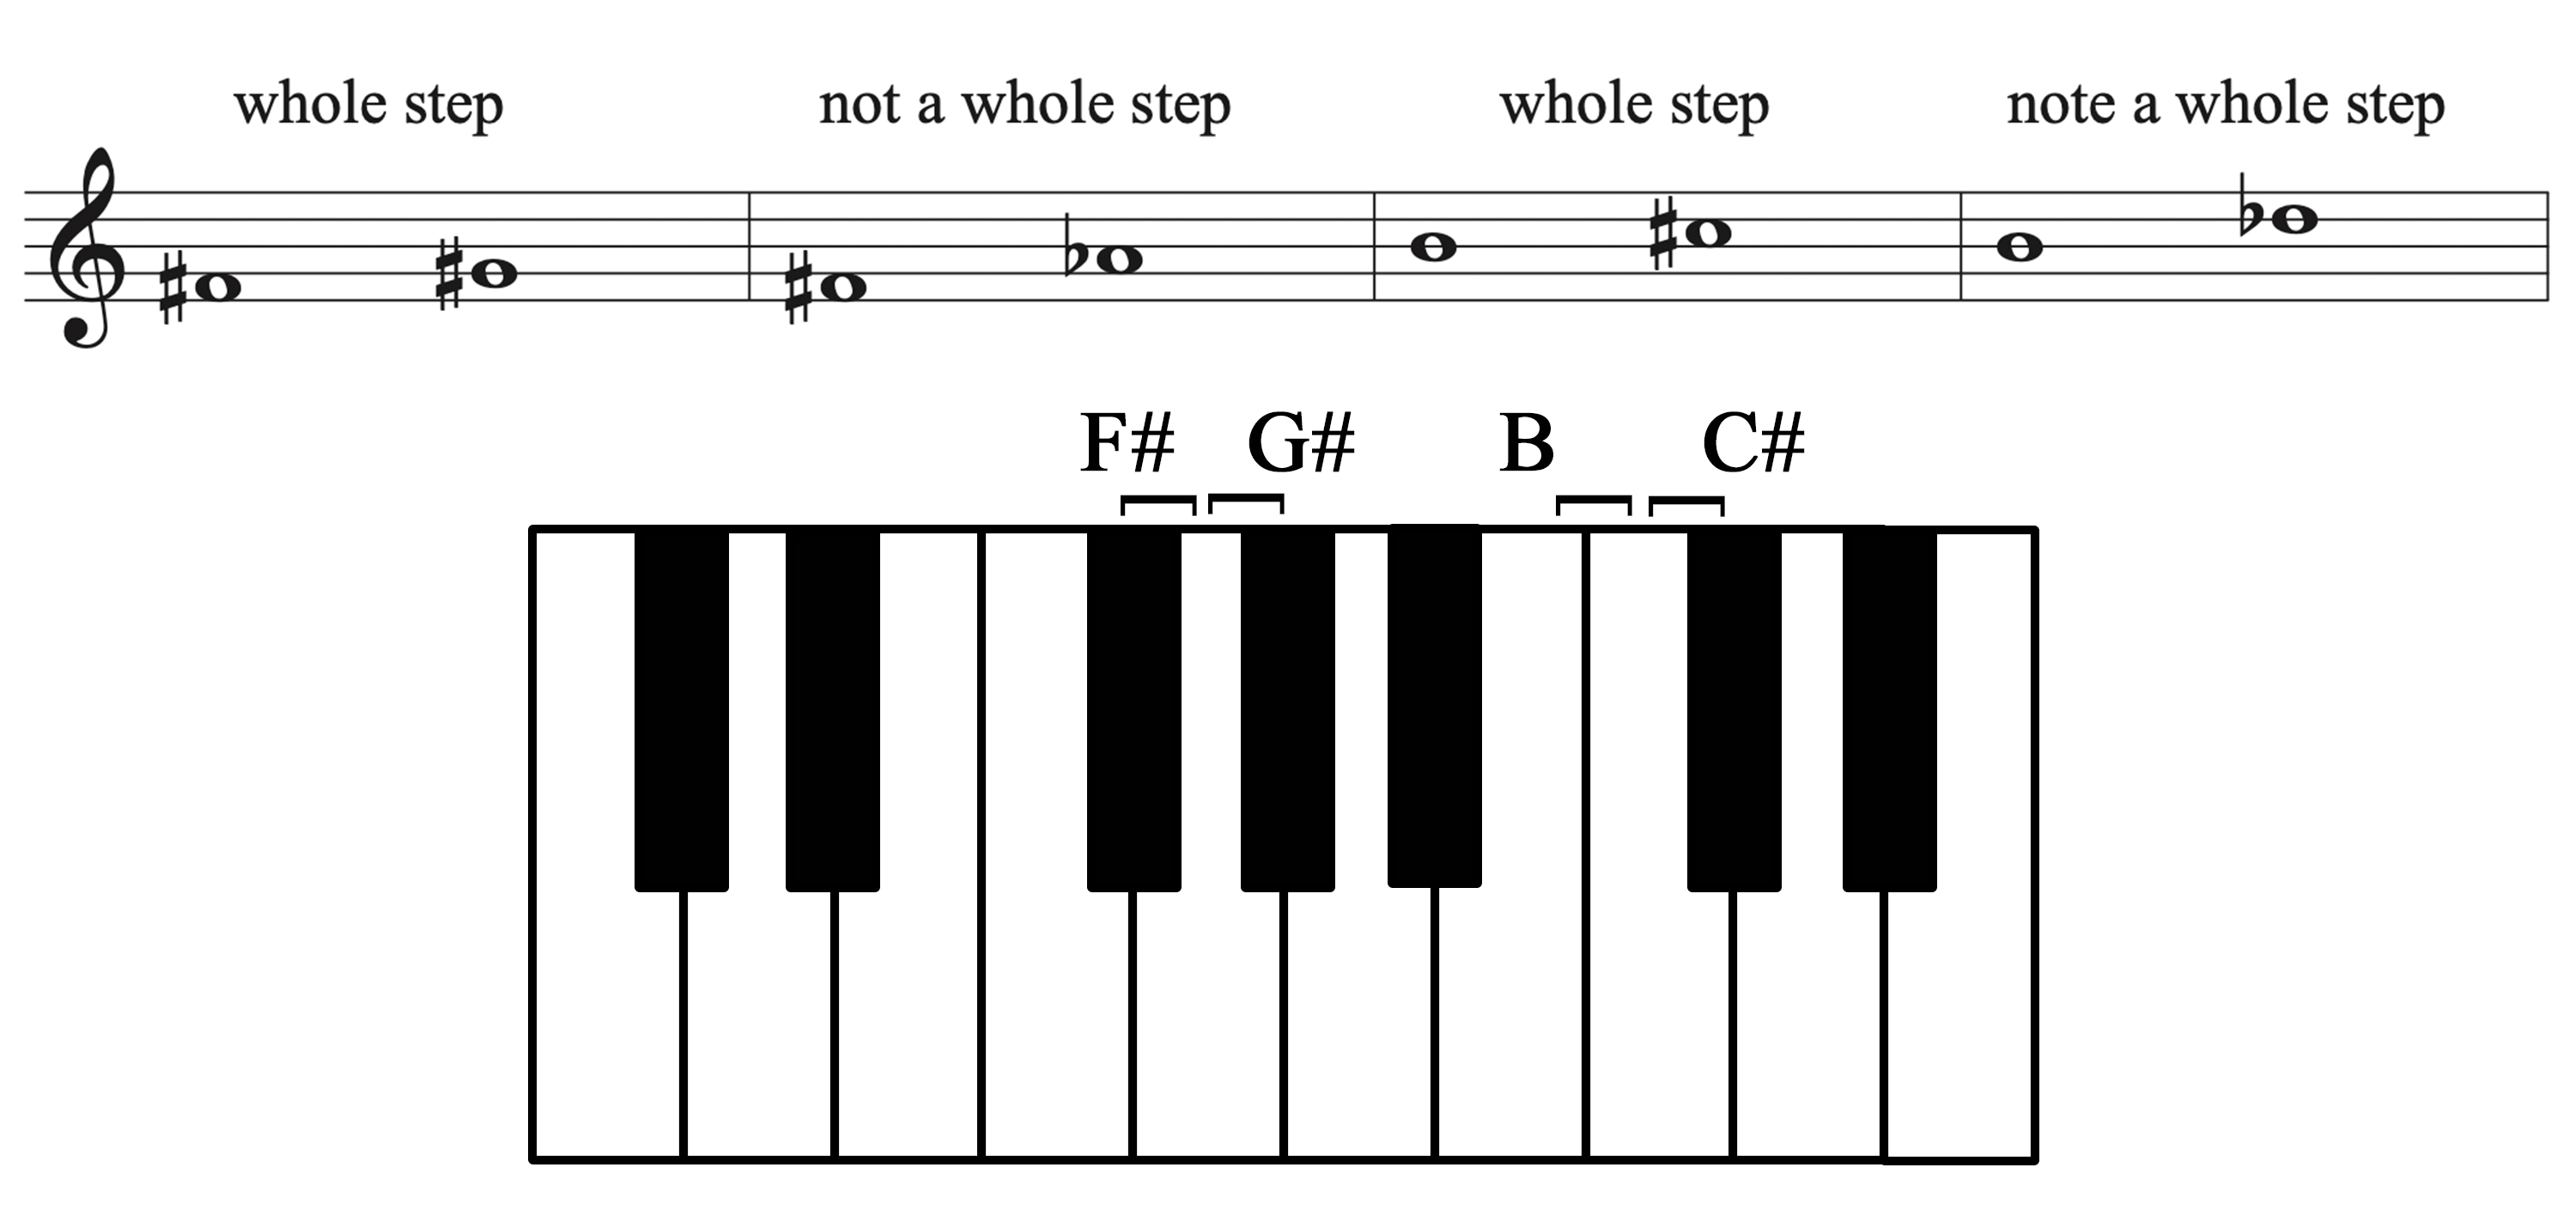 A keyboard showing F-sharp to G-sharp as a whole step, F-sharp to A-flat as not being a whole step, B to C-sharp as a whole step, and B to D-flat as not being a whole step.